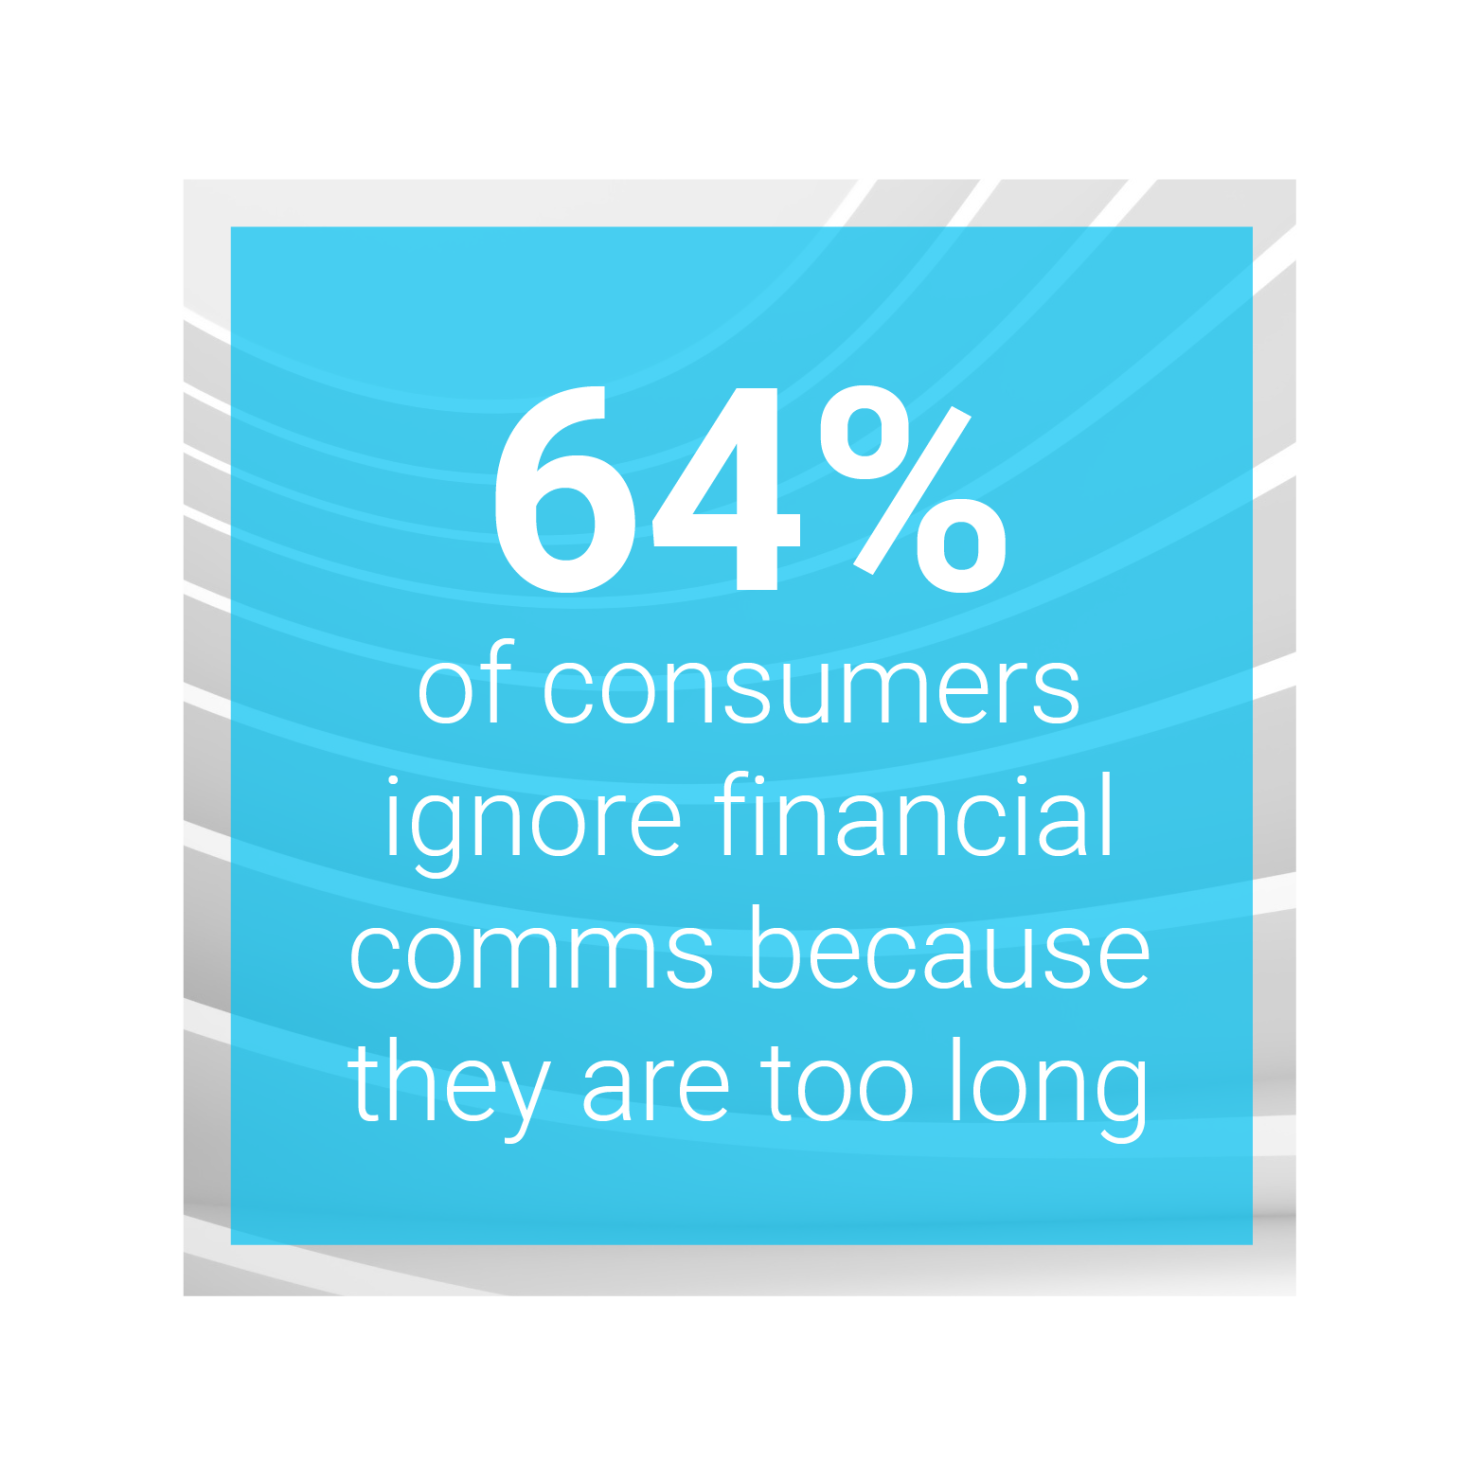 64% of consumers ignore financial comms because they are too long